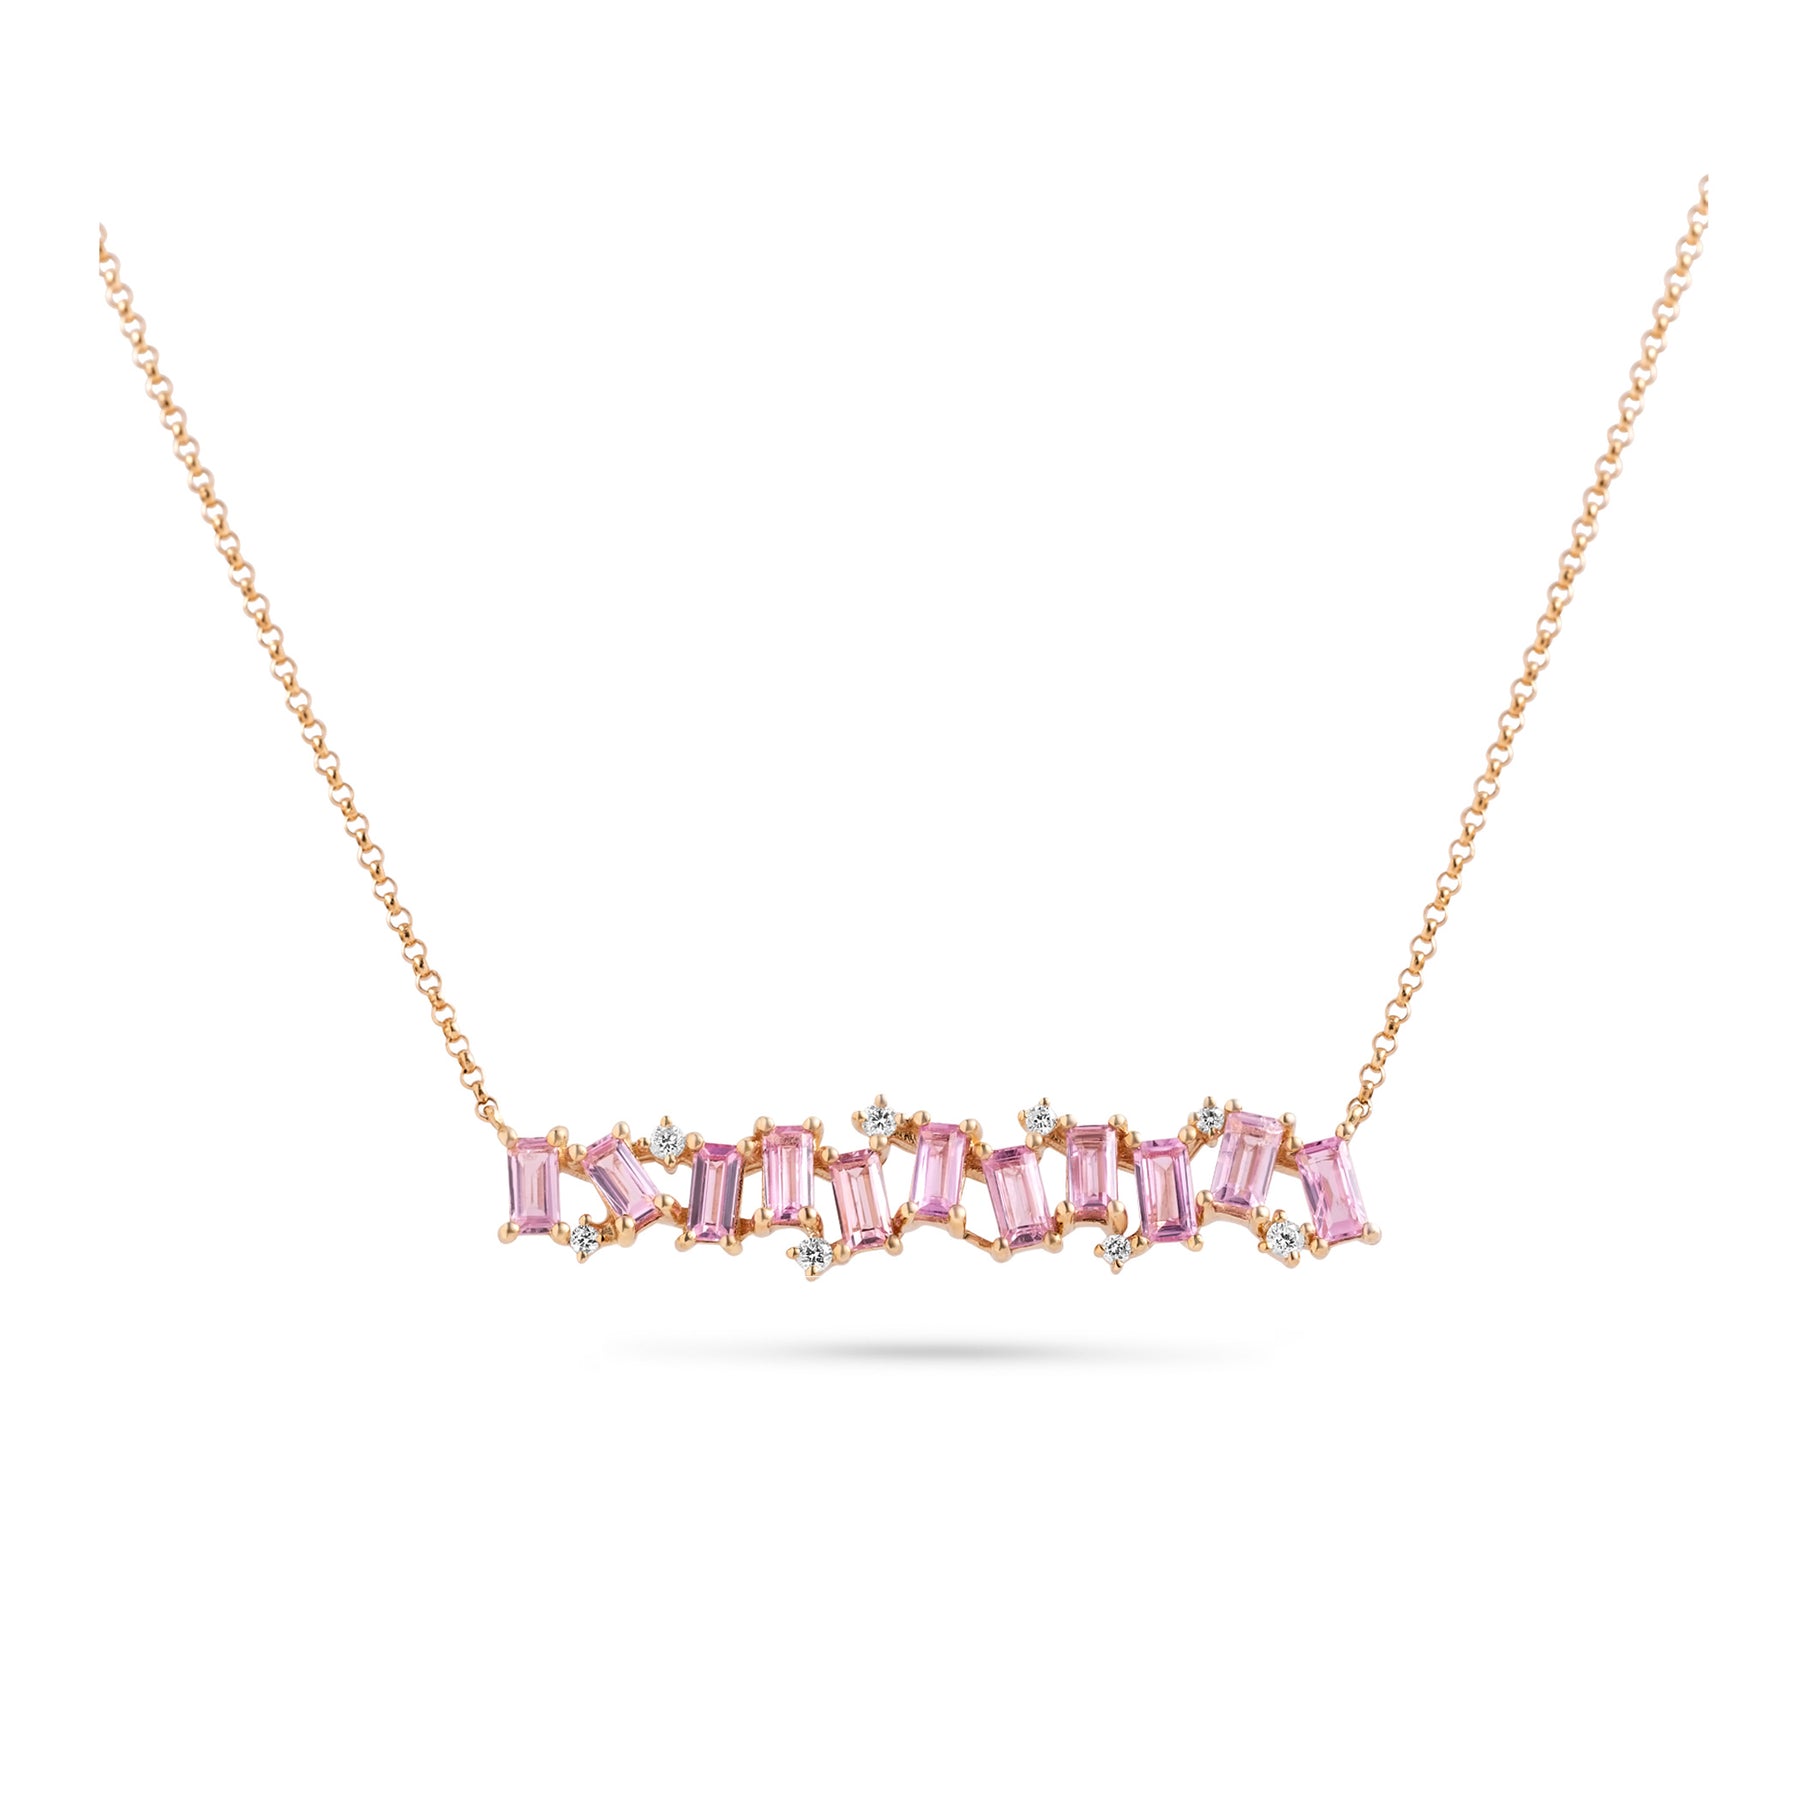 14k yellow gold diamond and pink sapphire bar style necklace